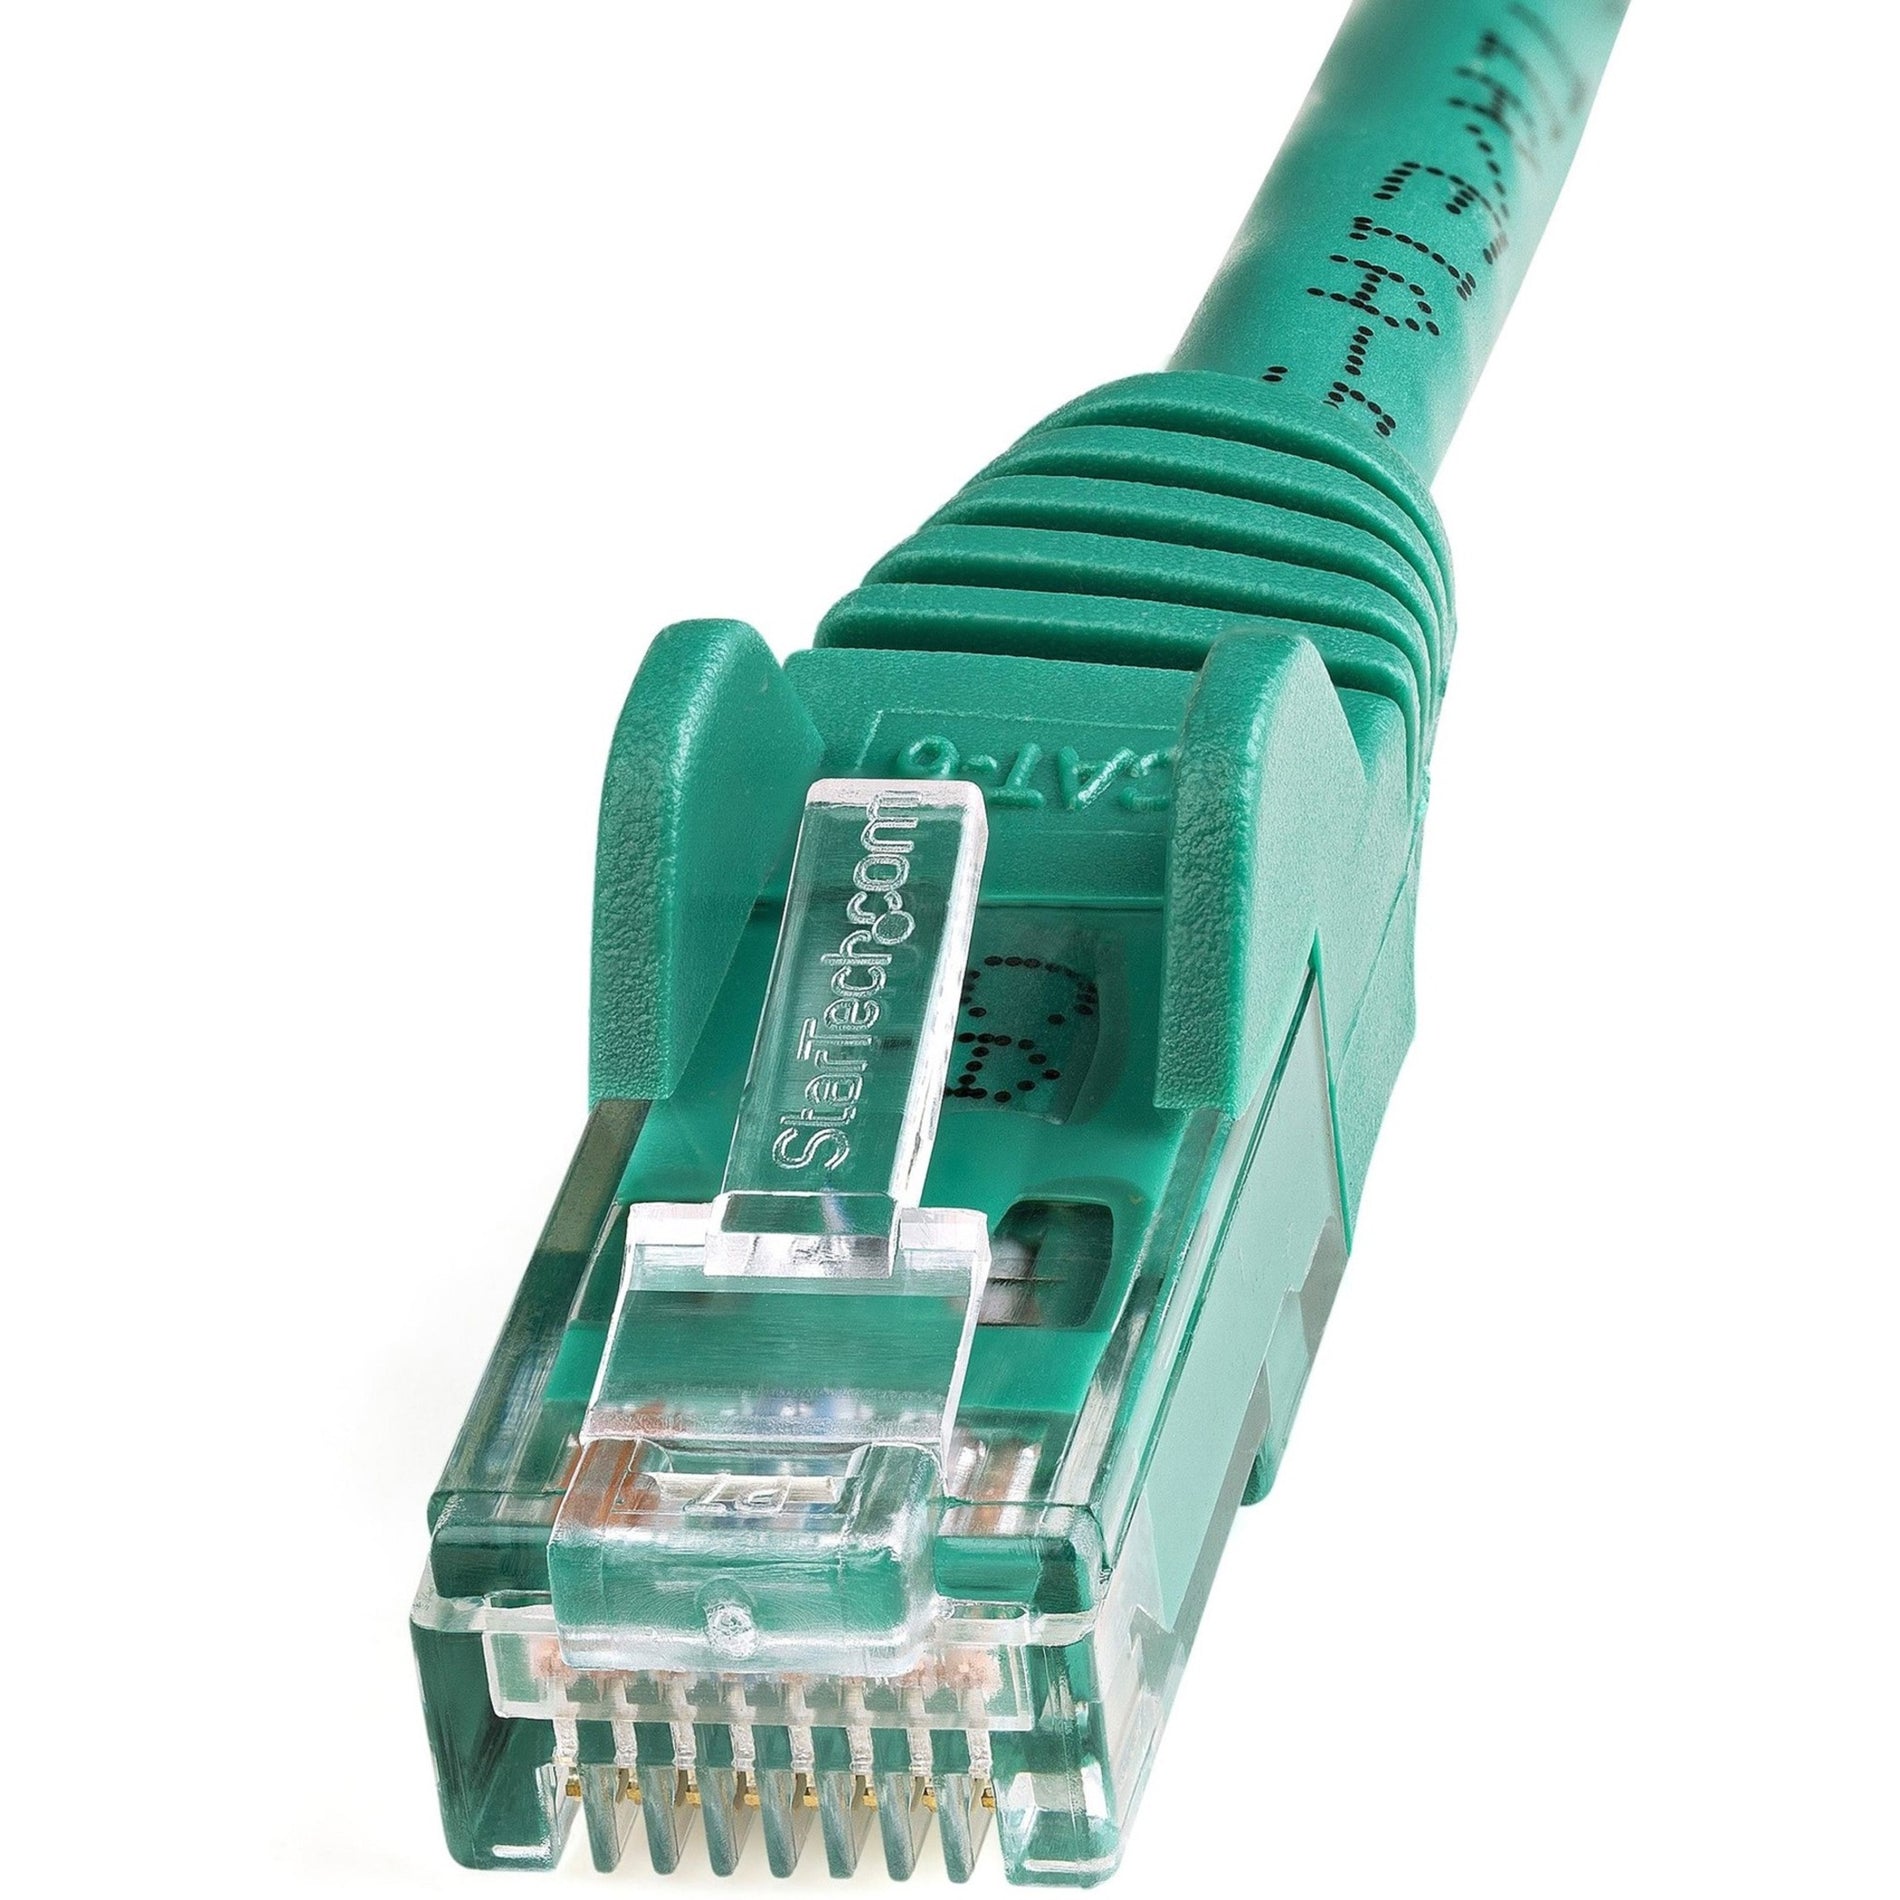 StarTech.com N6PATCH1GN Cat6 Patch Cable, 1ft Green Ethernet Cable, Snagless RJ45 Connectors